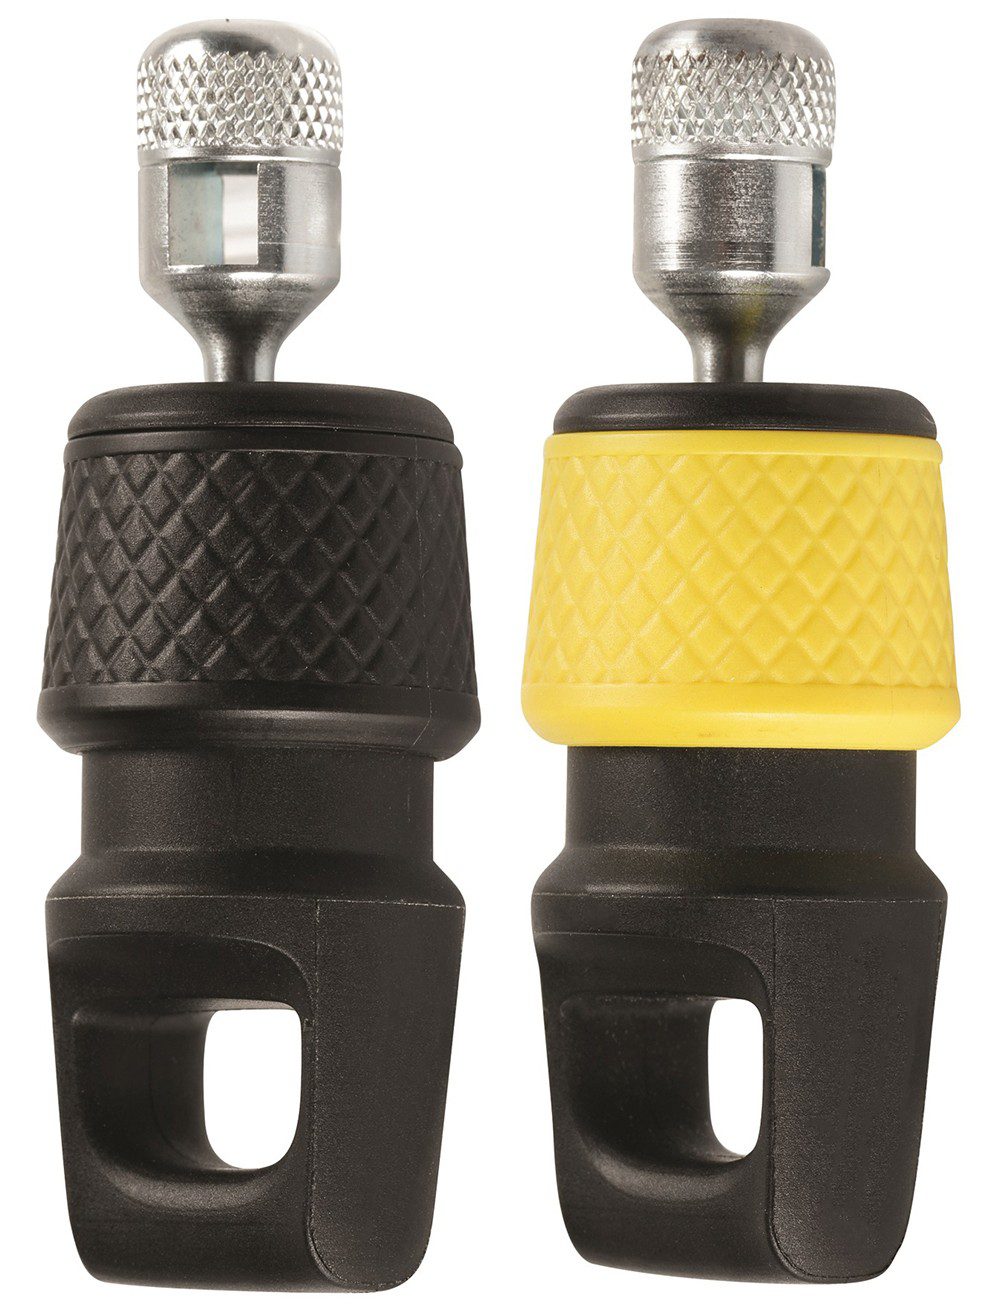 0721 Gear news Mares Magnetic Connector